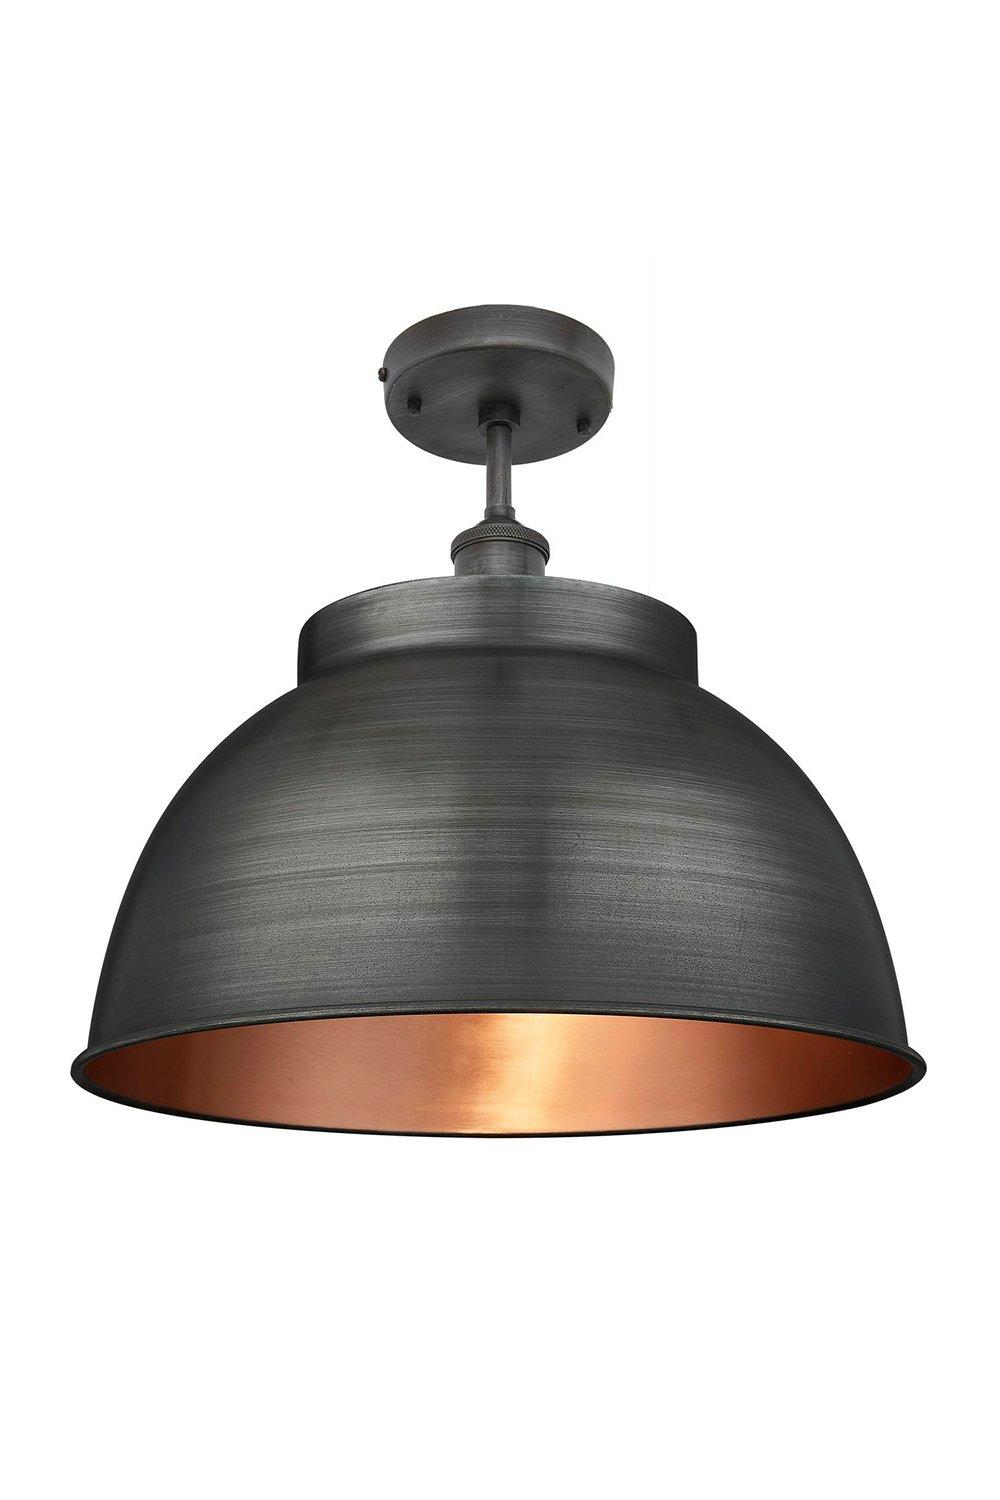 Brooklyn Dome Flush Mount, 17 Inch, Pewter & Copper, Pewter Holder